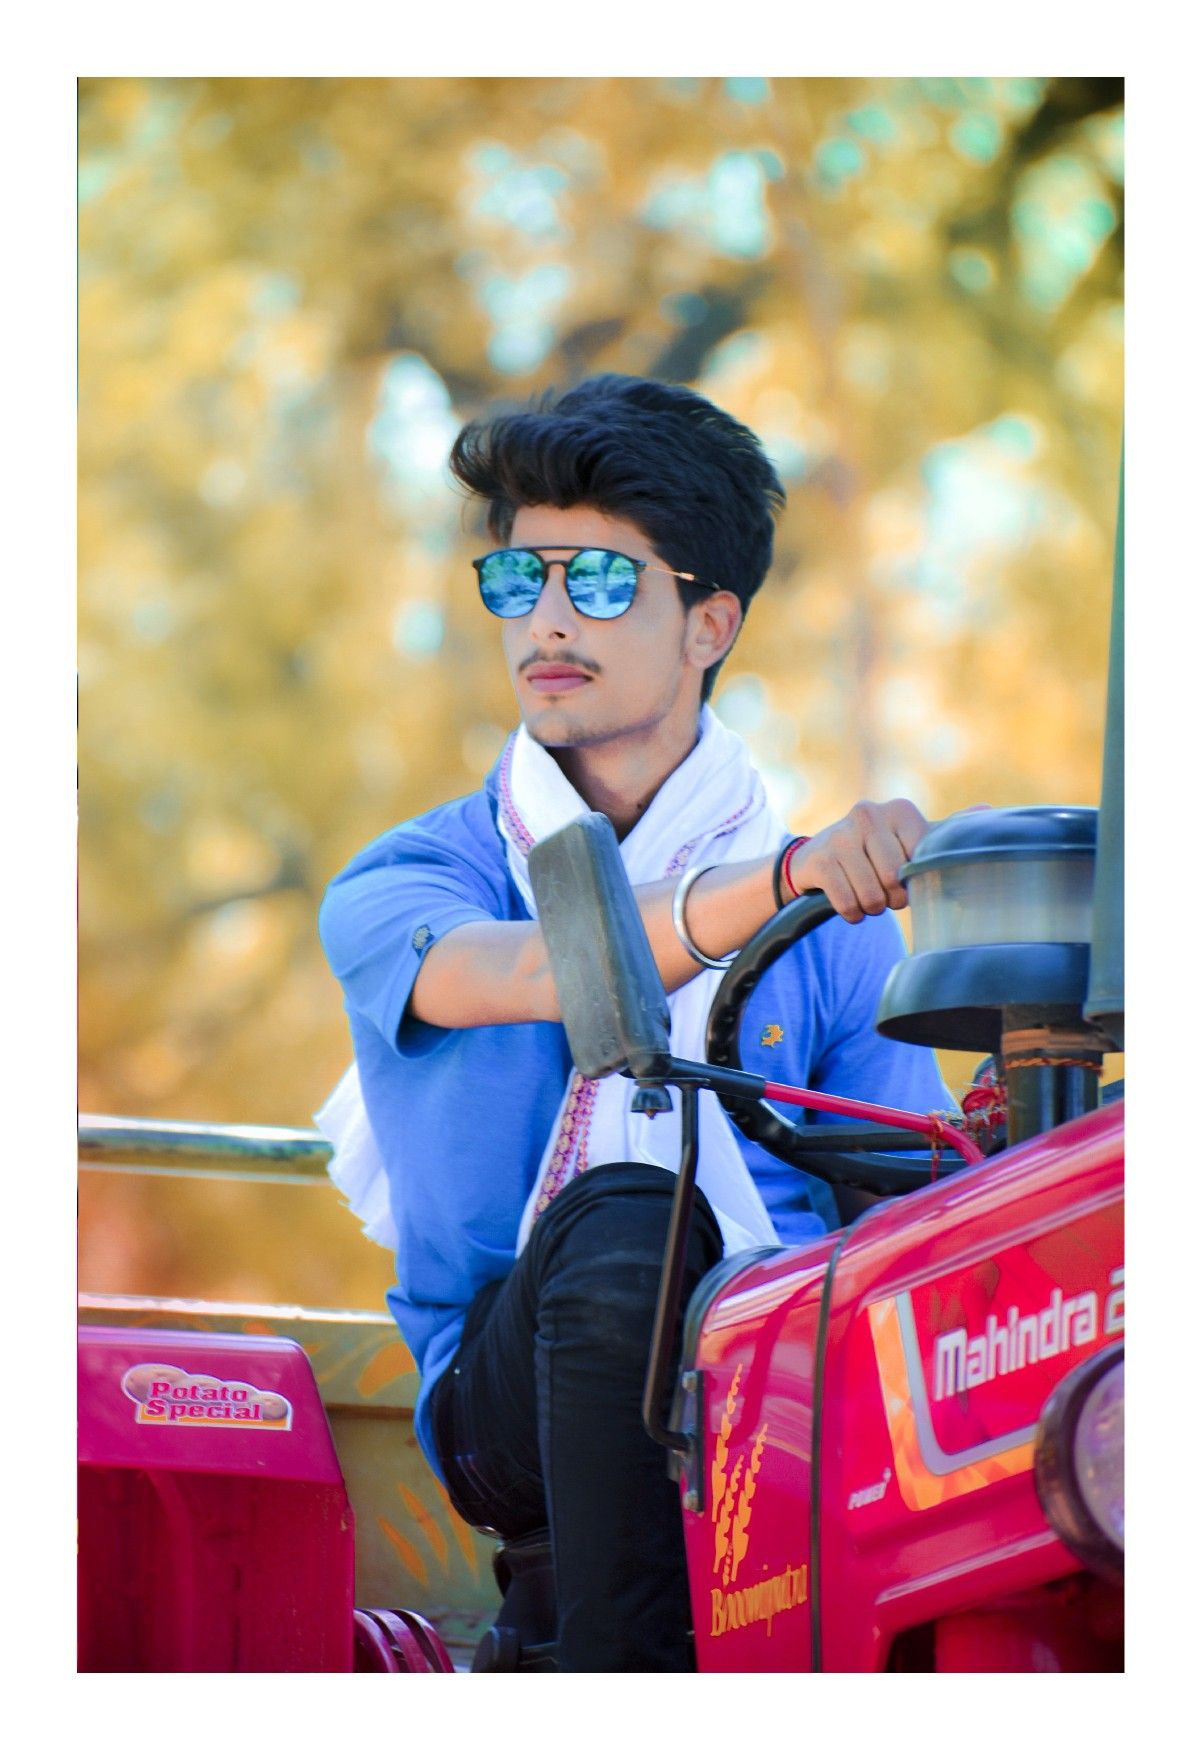 Sumit chahar. Best poses for boys, Background image for editing